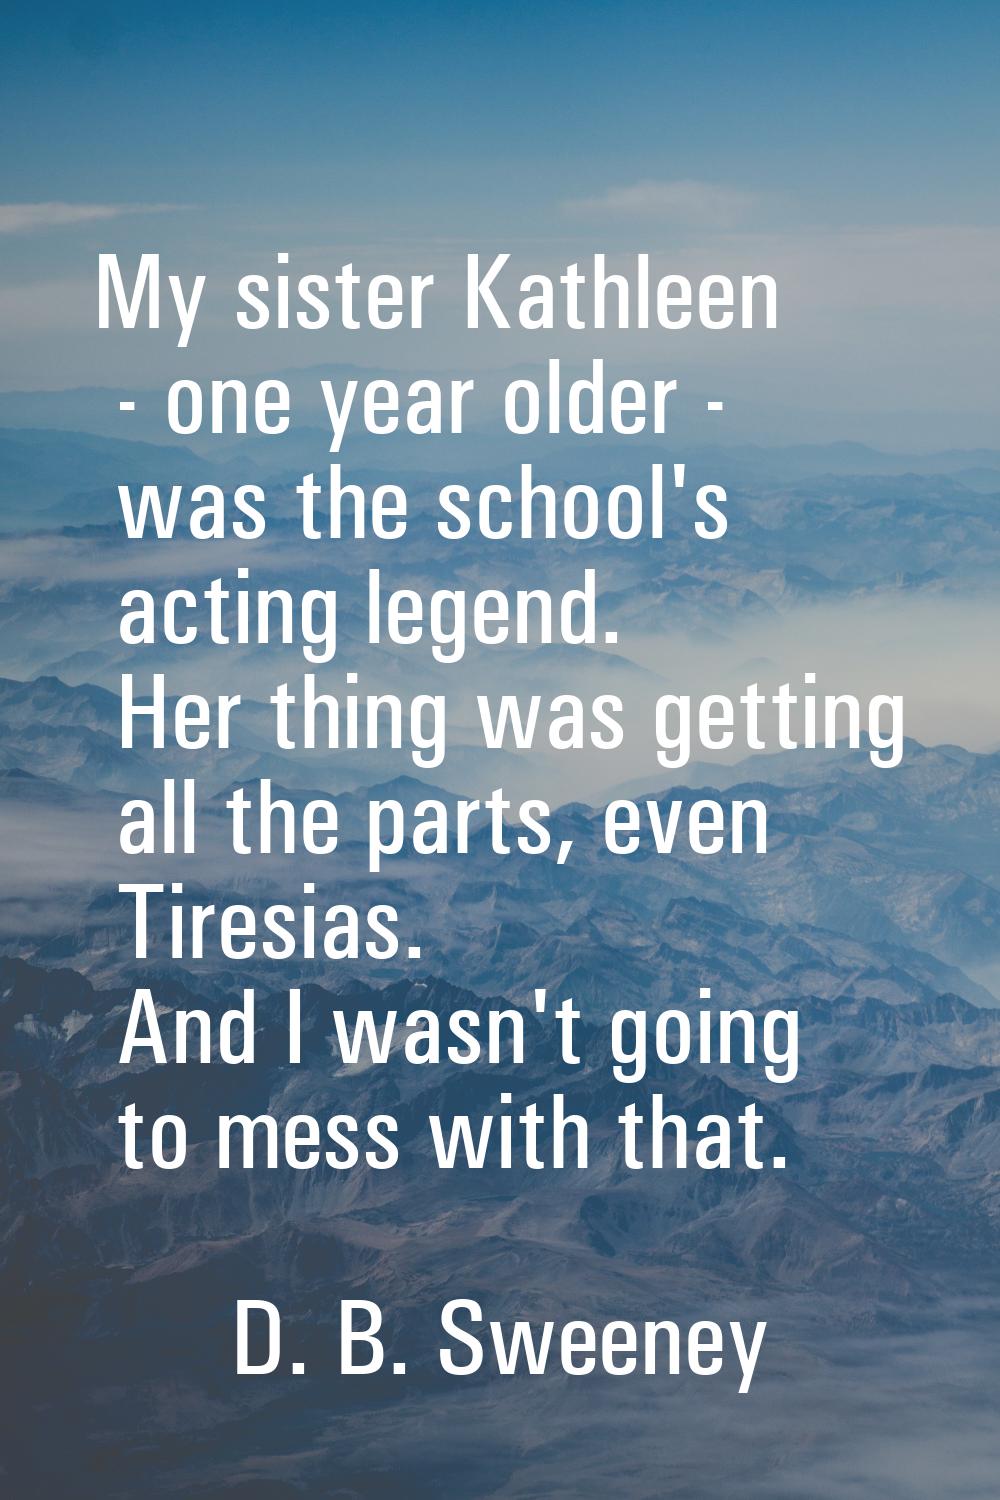 My sister Kathleen - one year older - was the school's acting legend. Her thing was getting all the